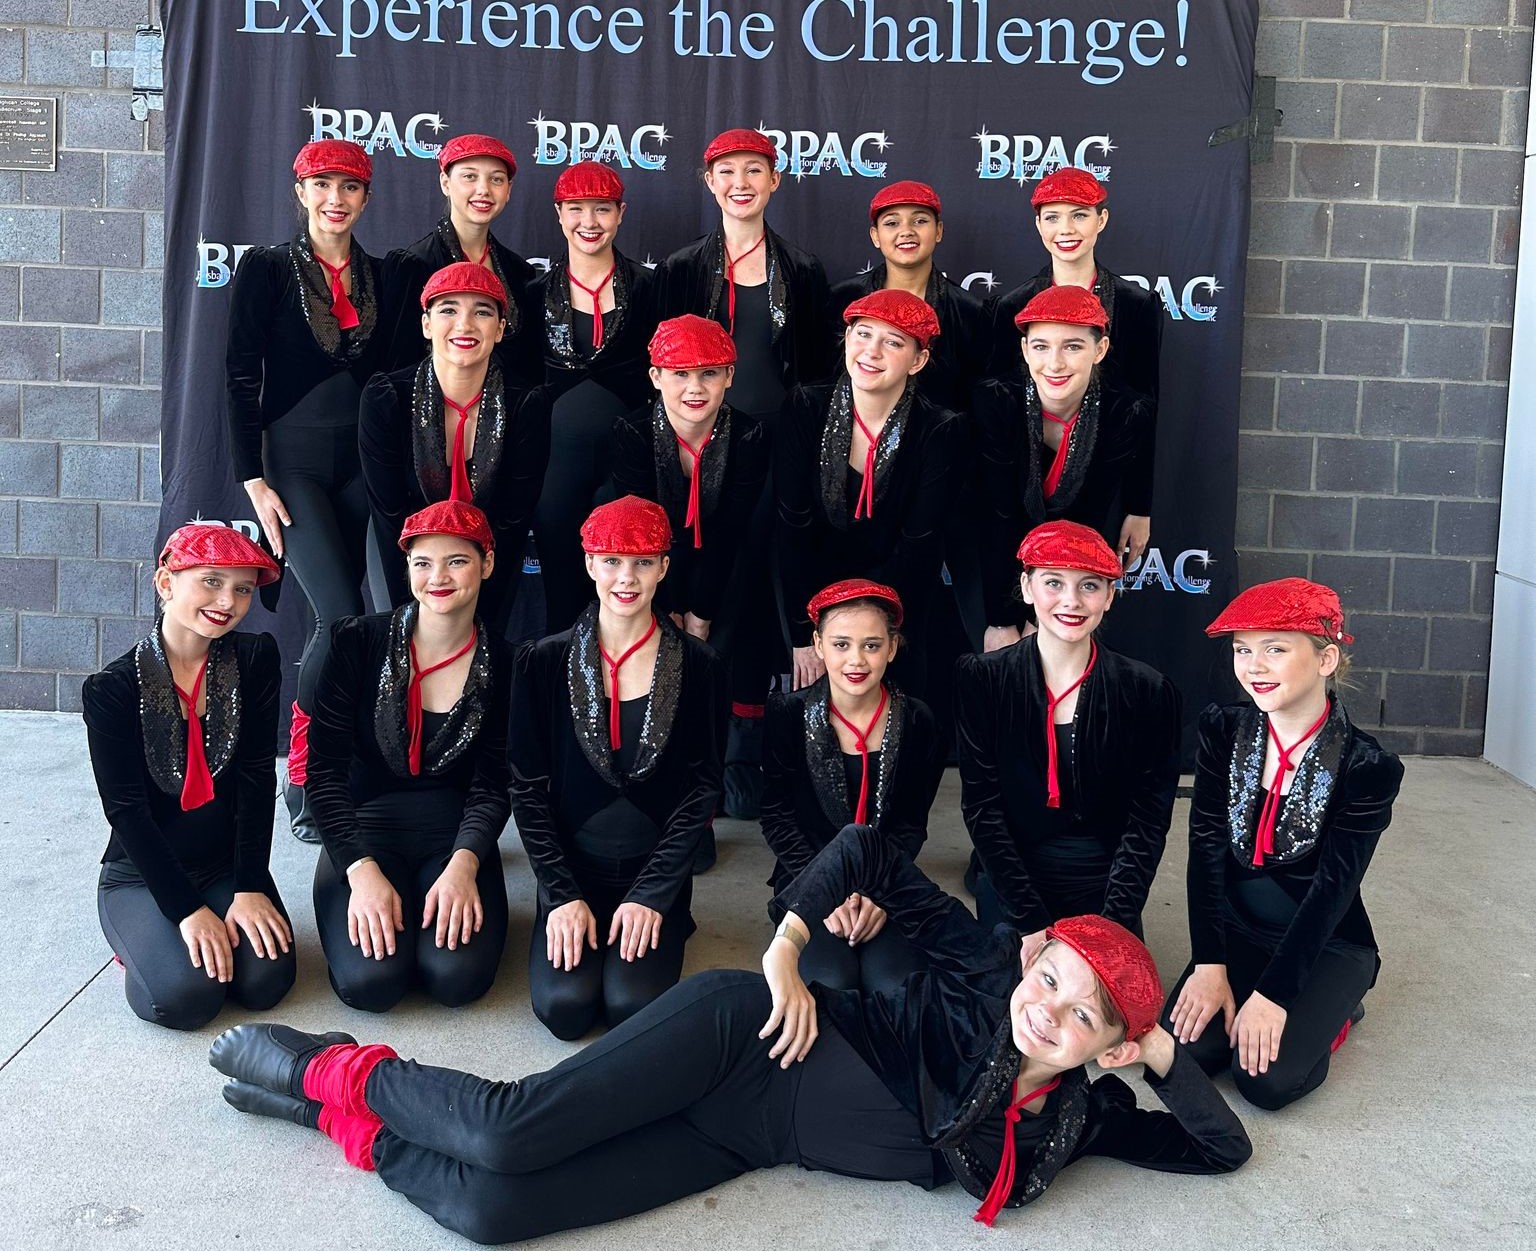 Opens Acrobatics “Trip” took home 2nd place at BPAC 2023. (left to right): Poppy, Layla, Violet, Lily, Izzy, Piper (back row). Lilly, Zoey, Jamie, Ashlea (third row.) Kaleah, Phoebe, Kirra, Teliah, Mia, Alexis (second row). Jack (front row)